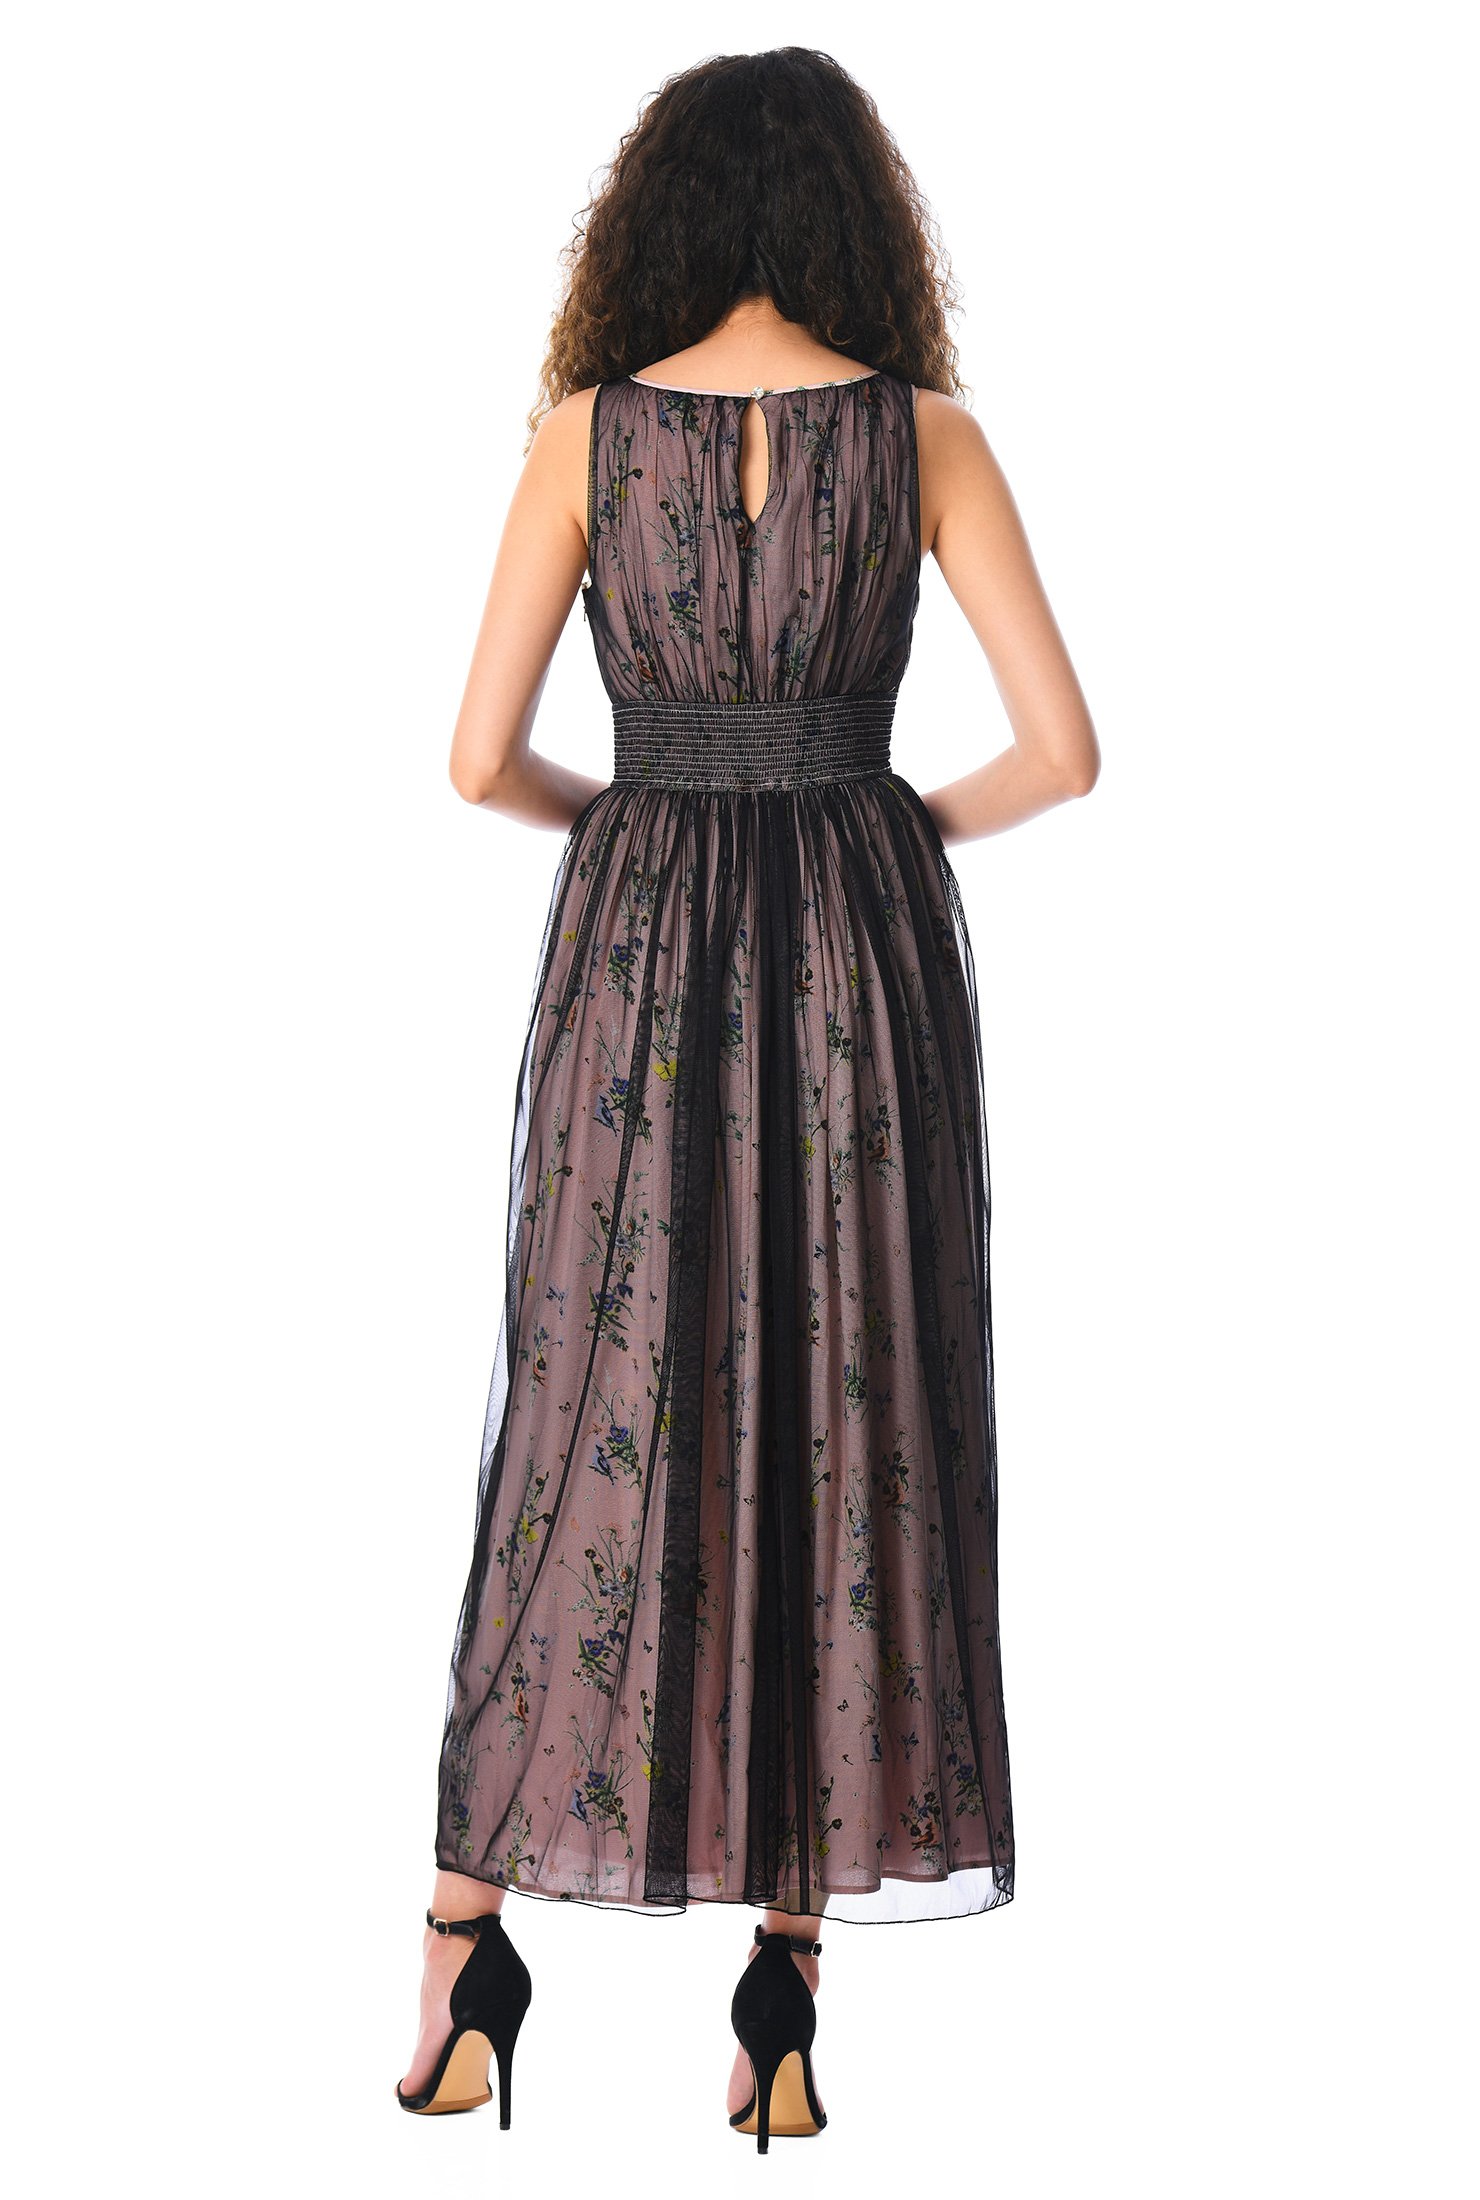 Shop Tulle overlay floral print ruched maxi dress | eShakti